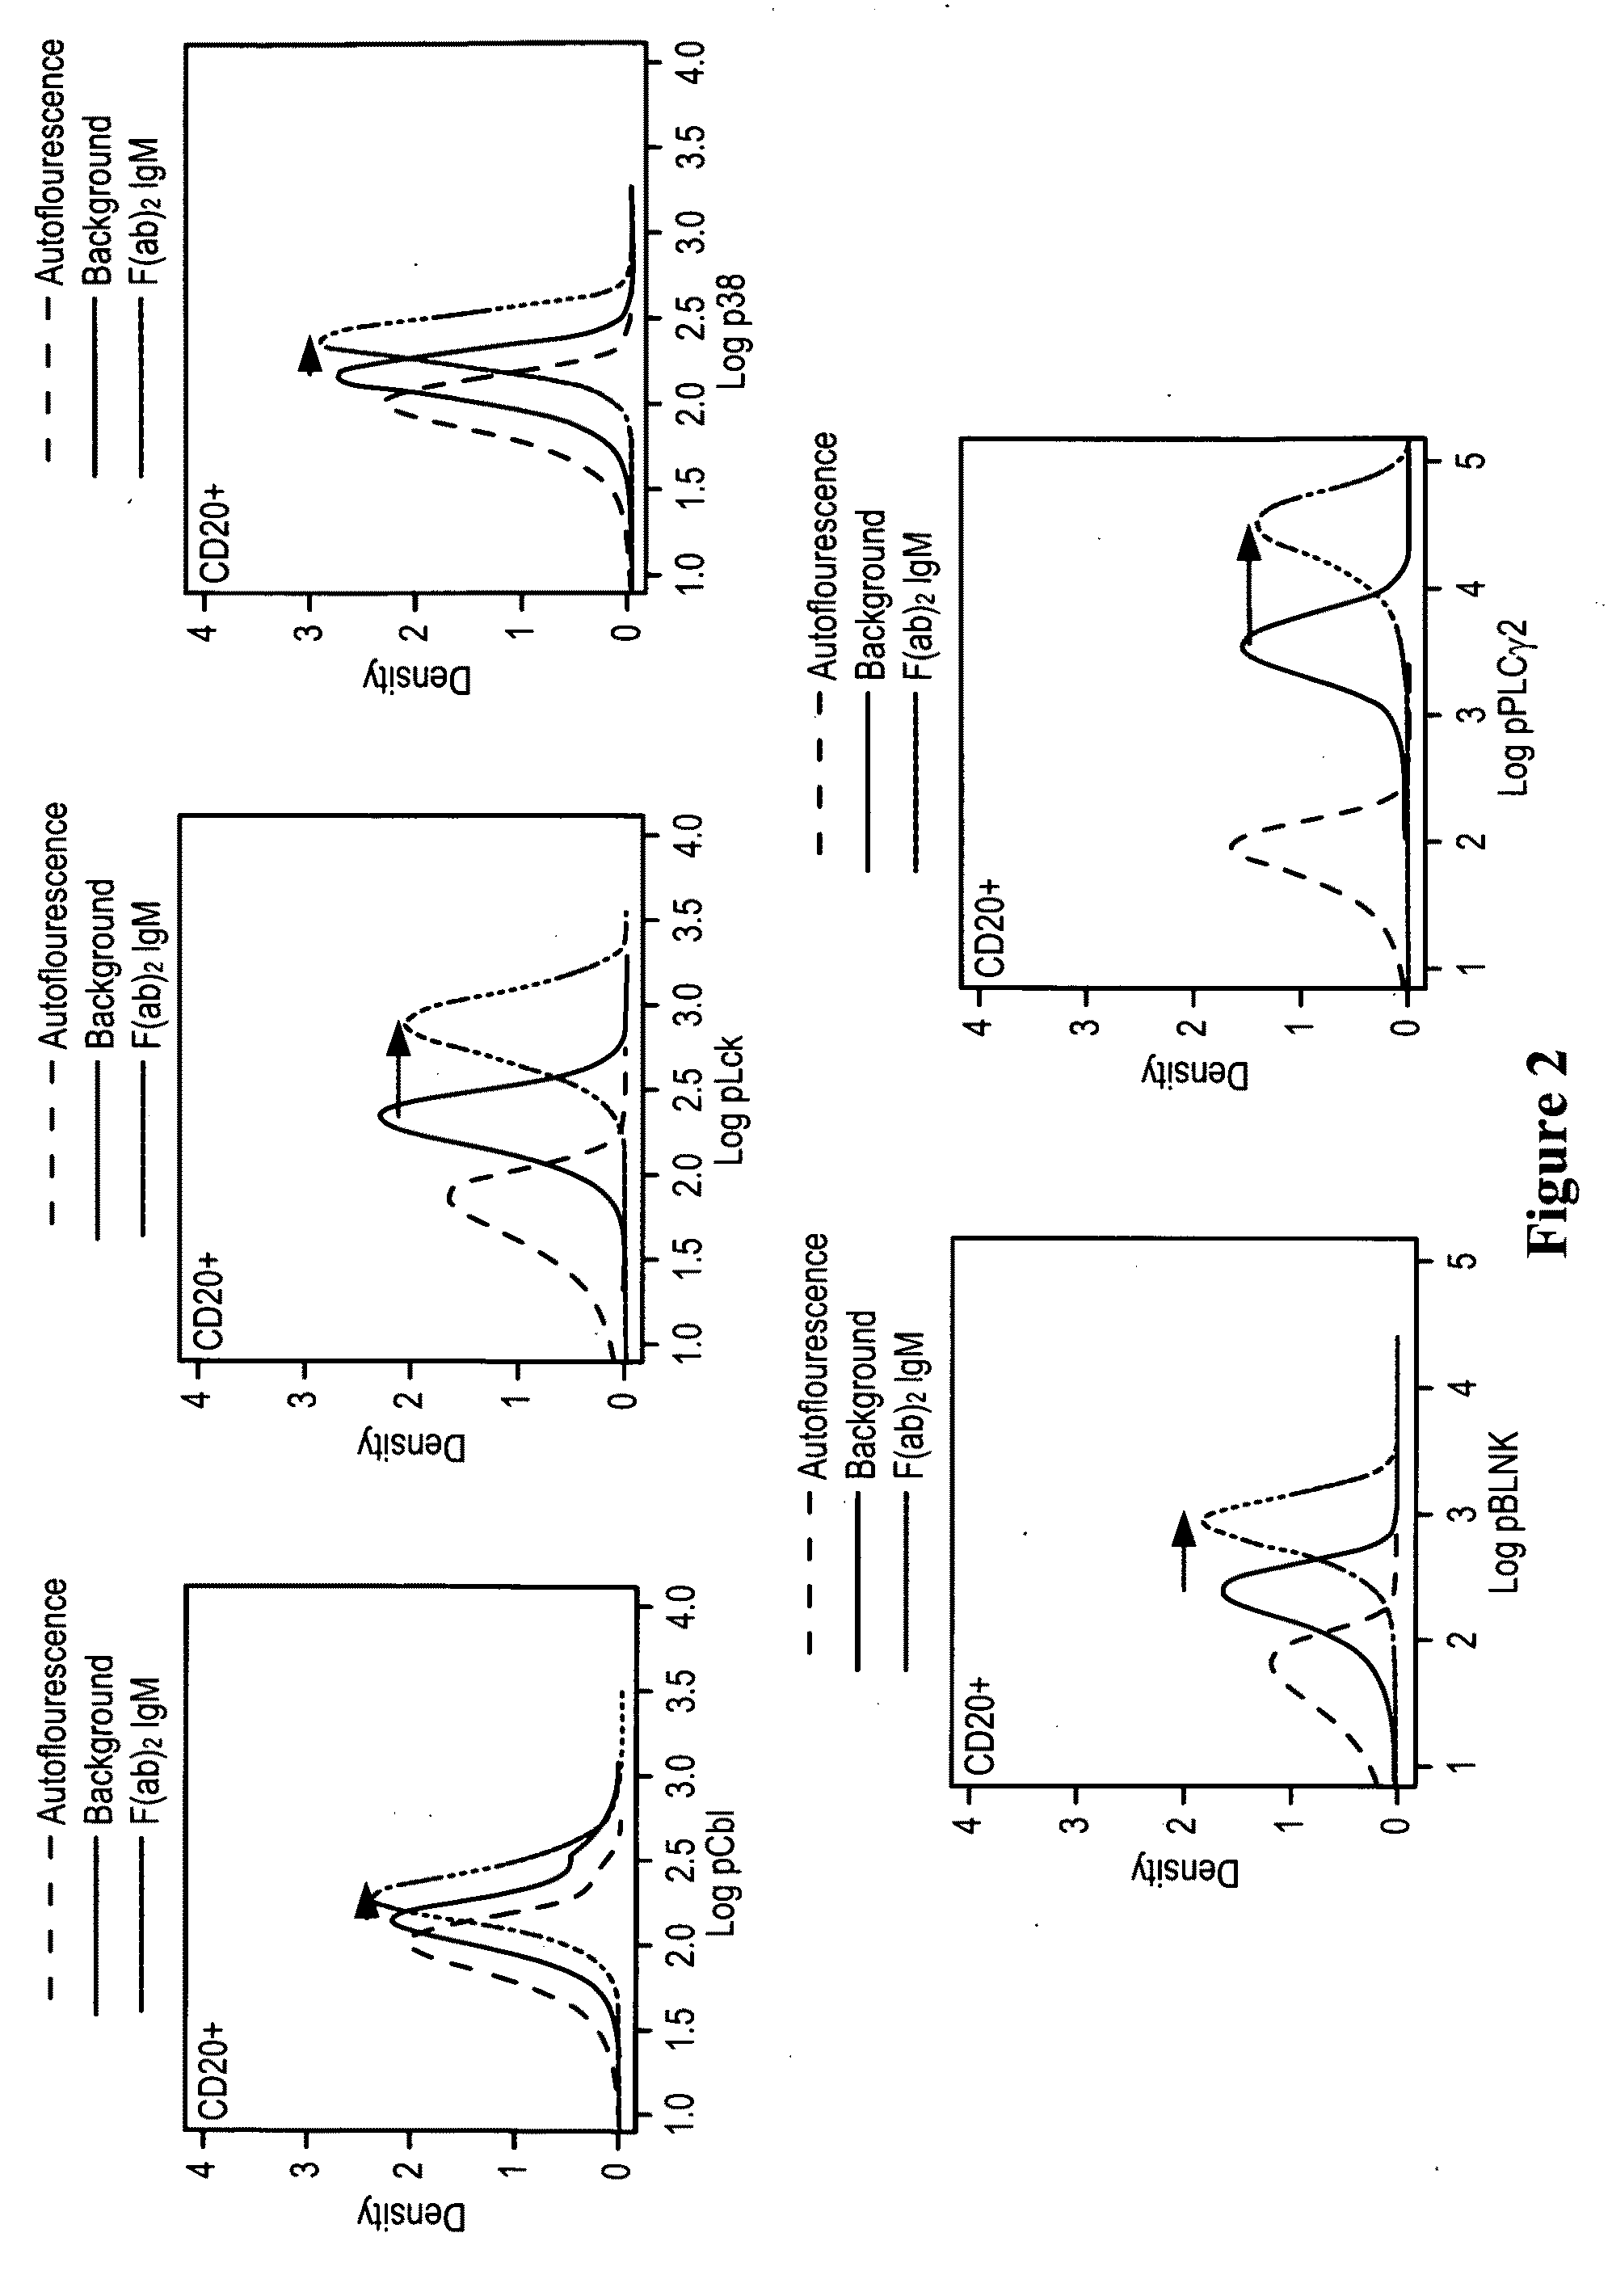 Methods for diagnosis prognosis and methods of treatment